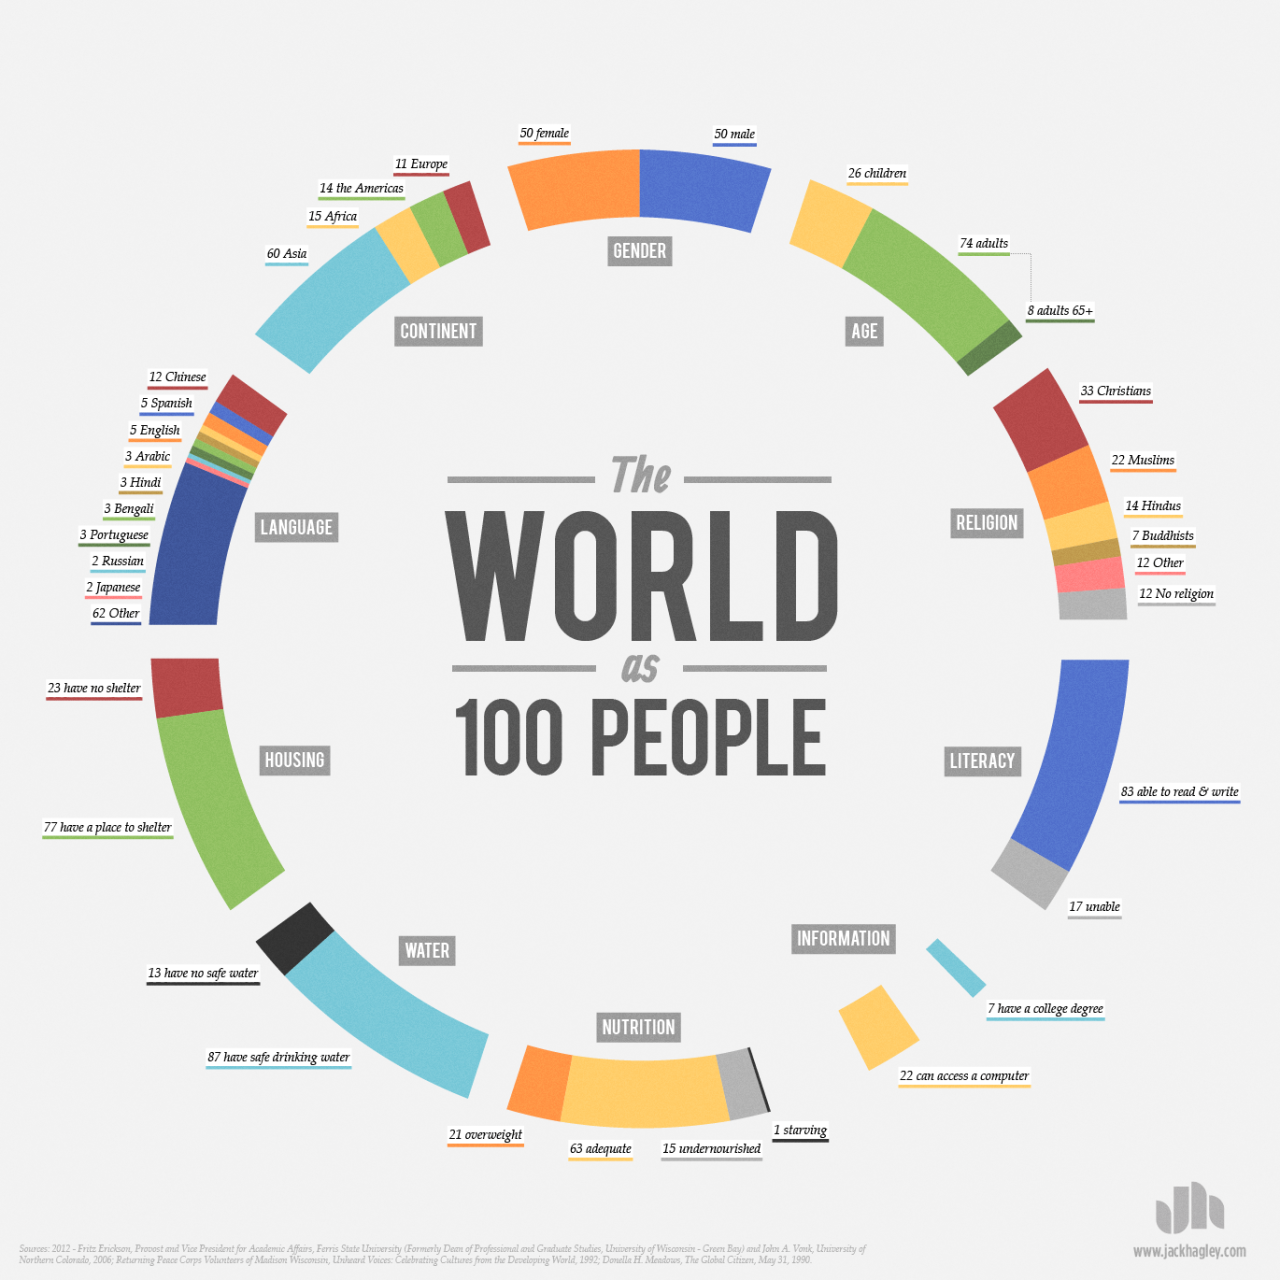 nevver:

The World as 100 People [larger]
